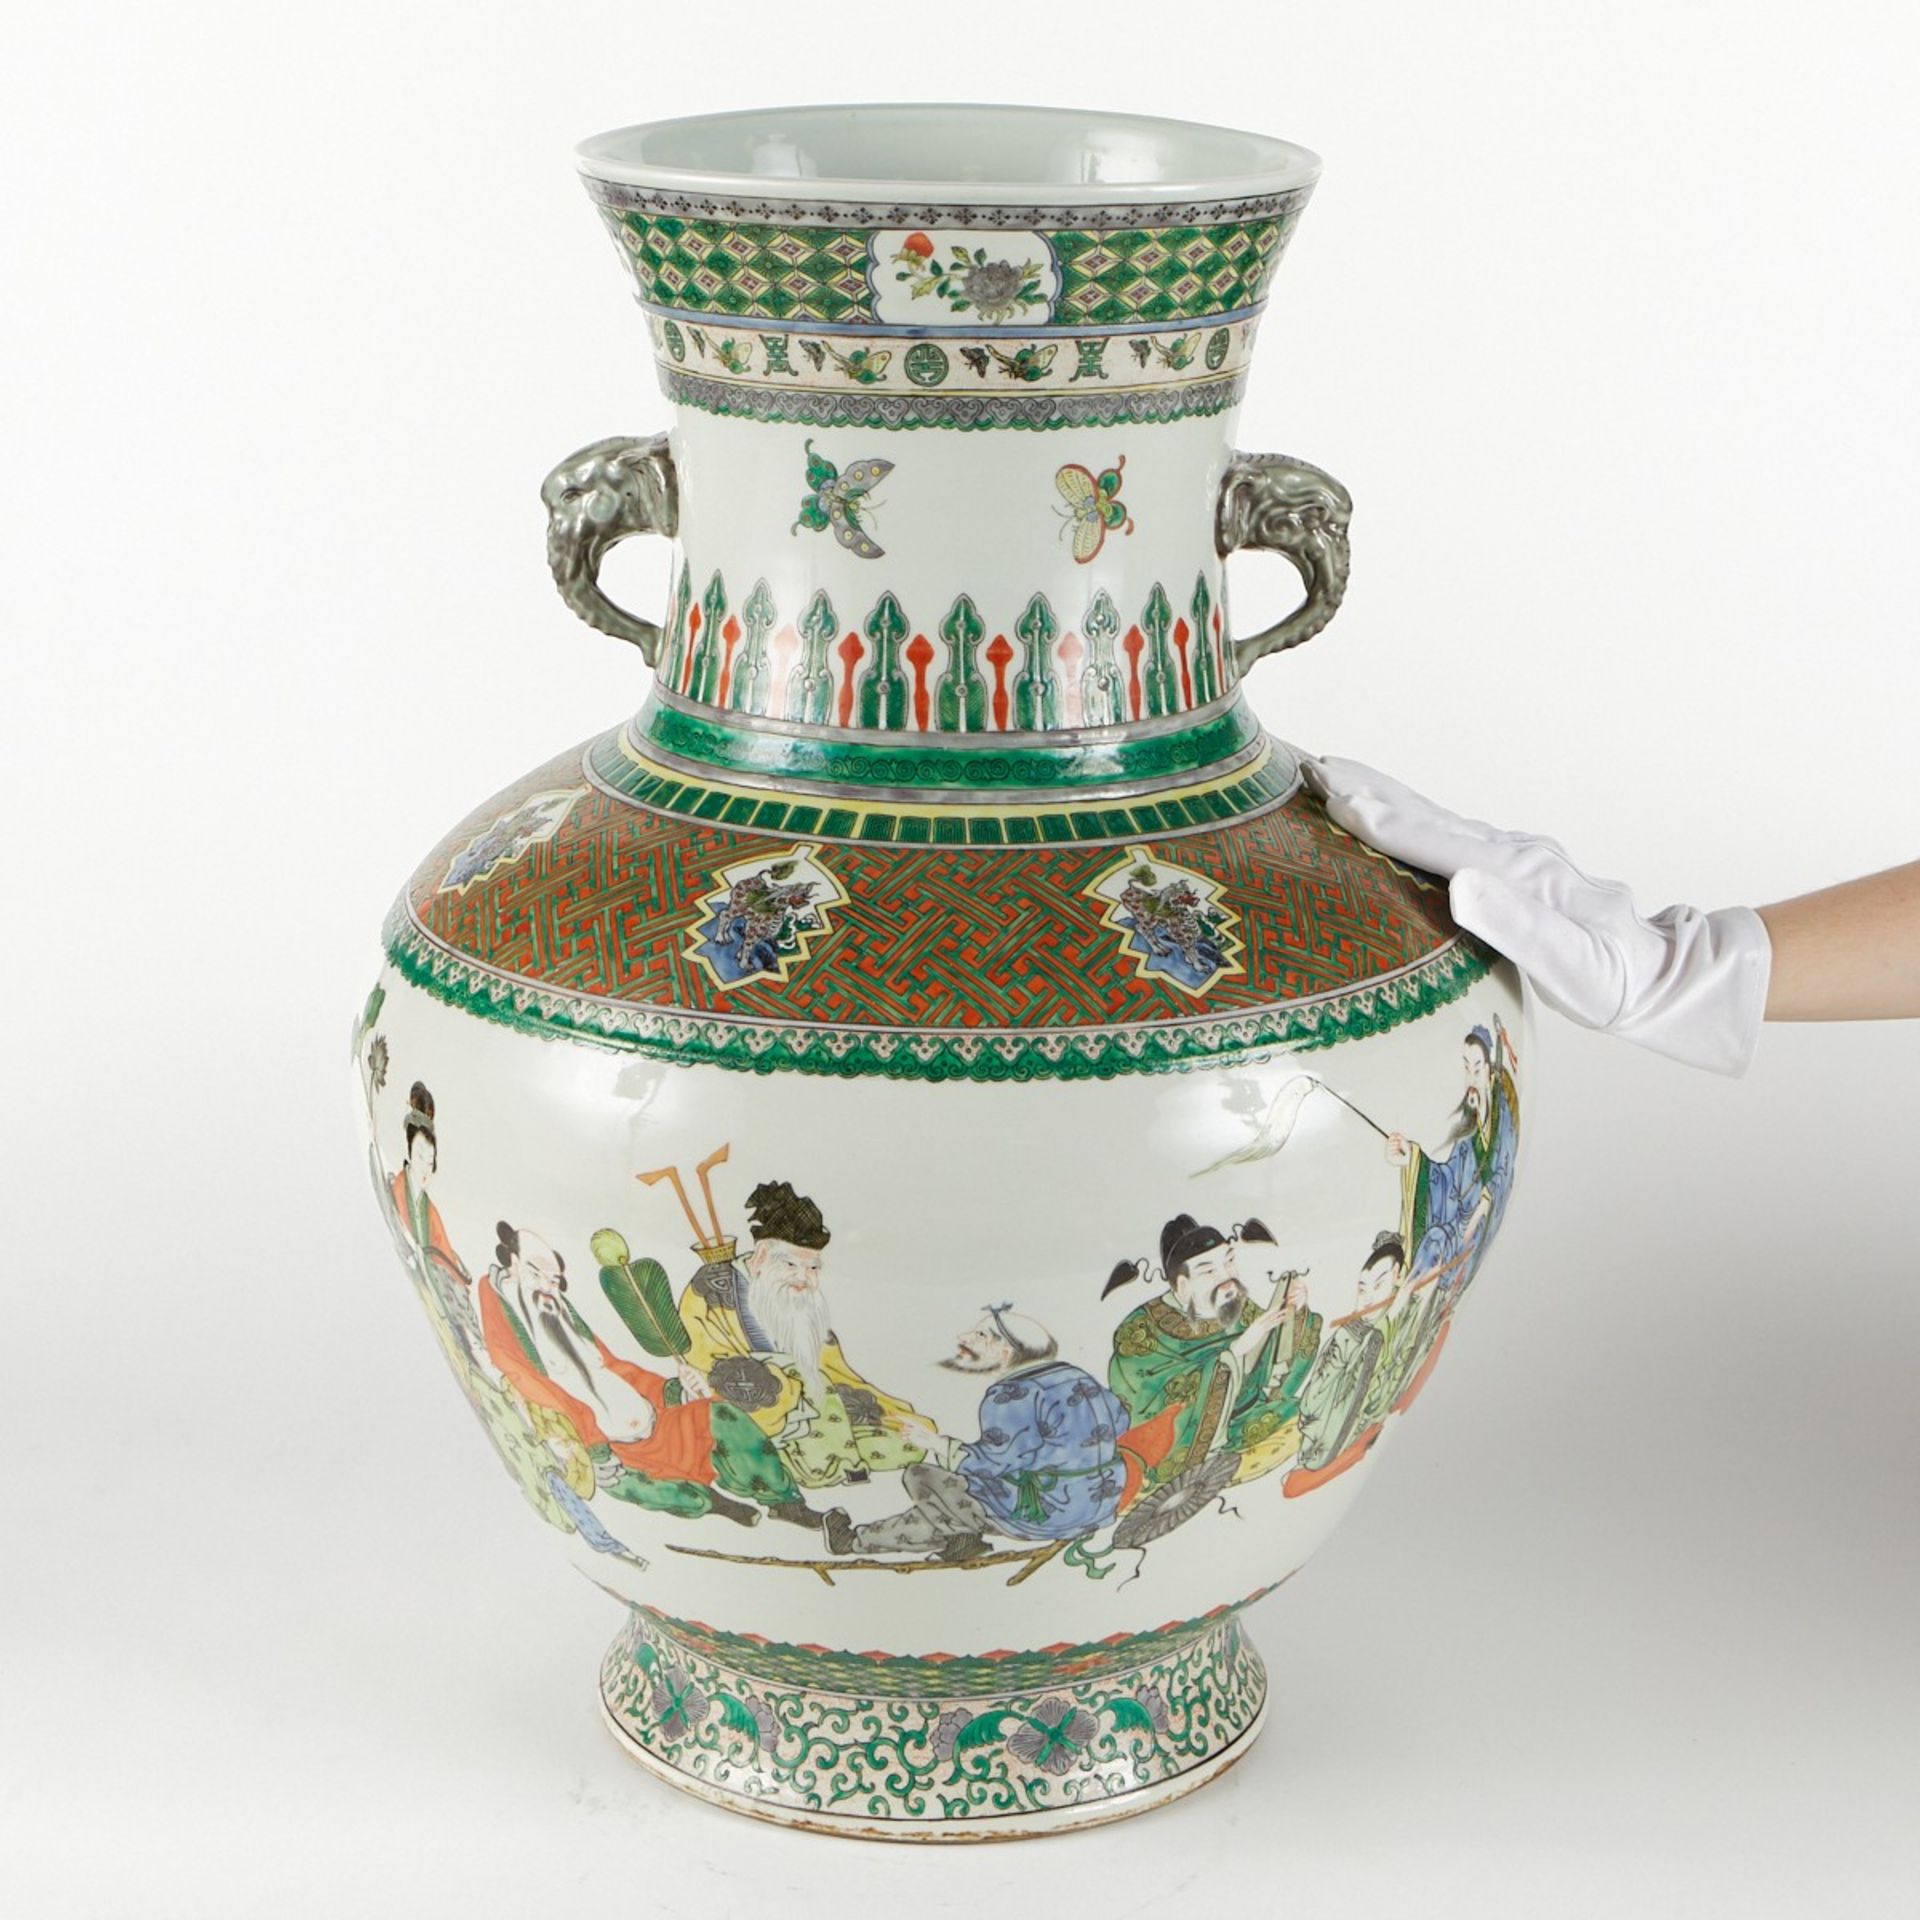 Enormous Chinese Famille Verte Vase - Image 9 of 11